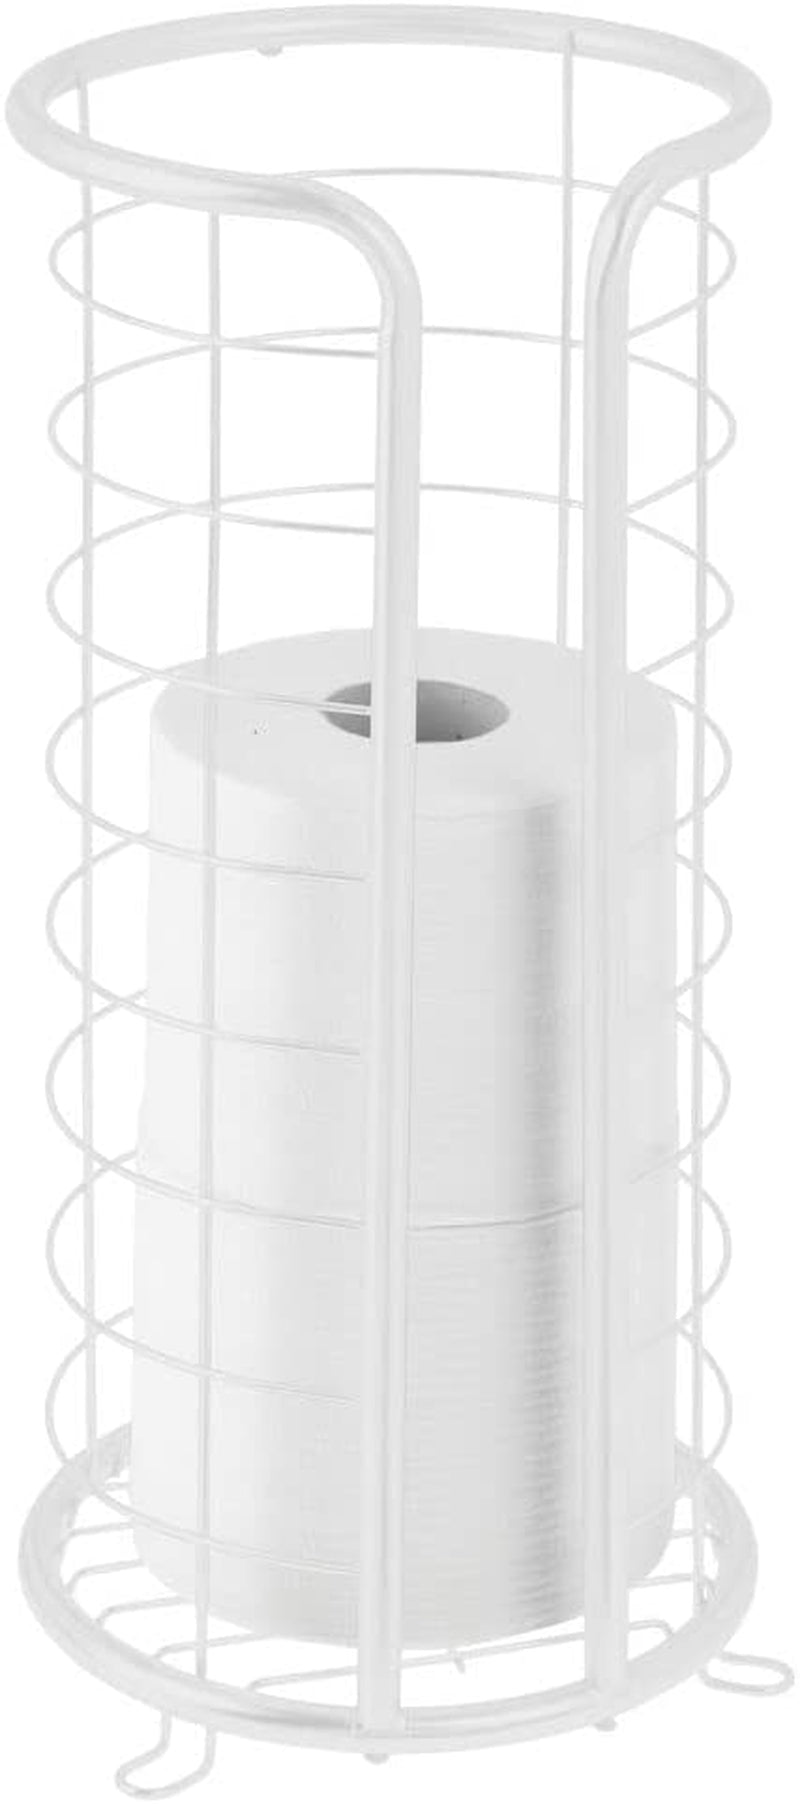 mDesign, Mdesign Metal Free Stand Toilet Paper Organizer Stand, 3 Rolls of Toilet Tissue Storage, Bathroom Decor Accessory - under Sink, Vanity, or inside Cabinet Shelf, Omni Collection, Graphite Gray